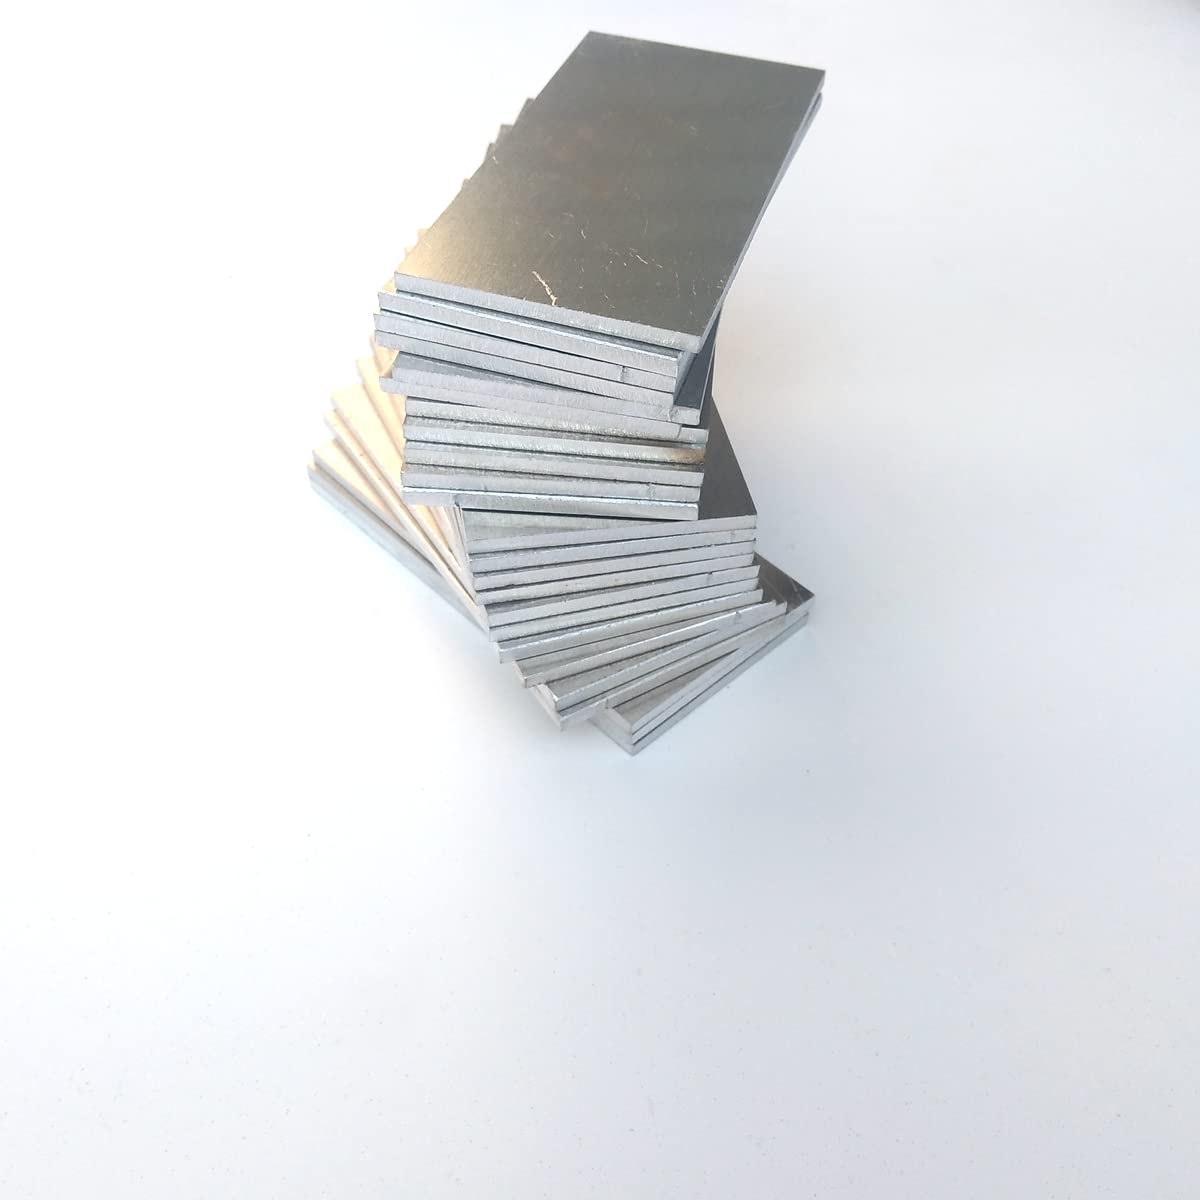 Biscuits Welding Practice Aluminum Parts- 5052 Aluminum - 2*4inch- 24Tablets-Very Suitable- Practice and Training for MIG, TIG, Stick, Arc, Gas and Brazing